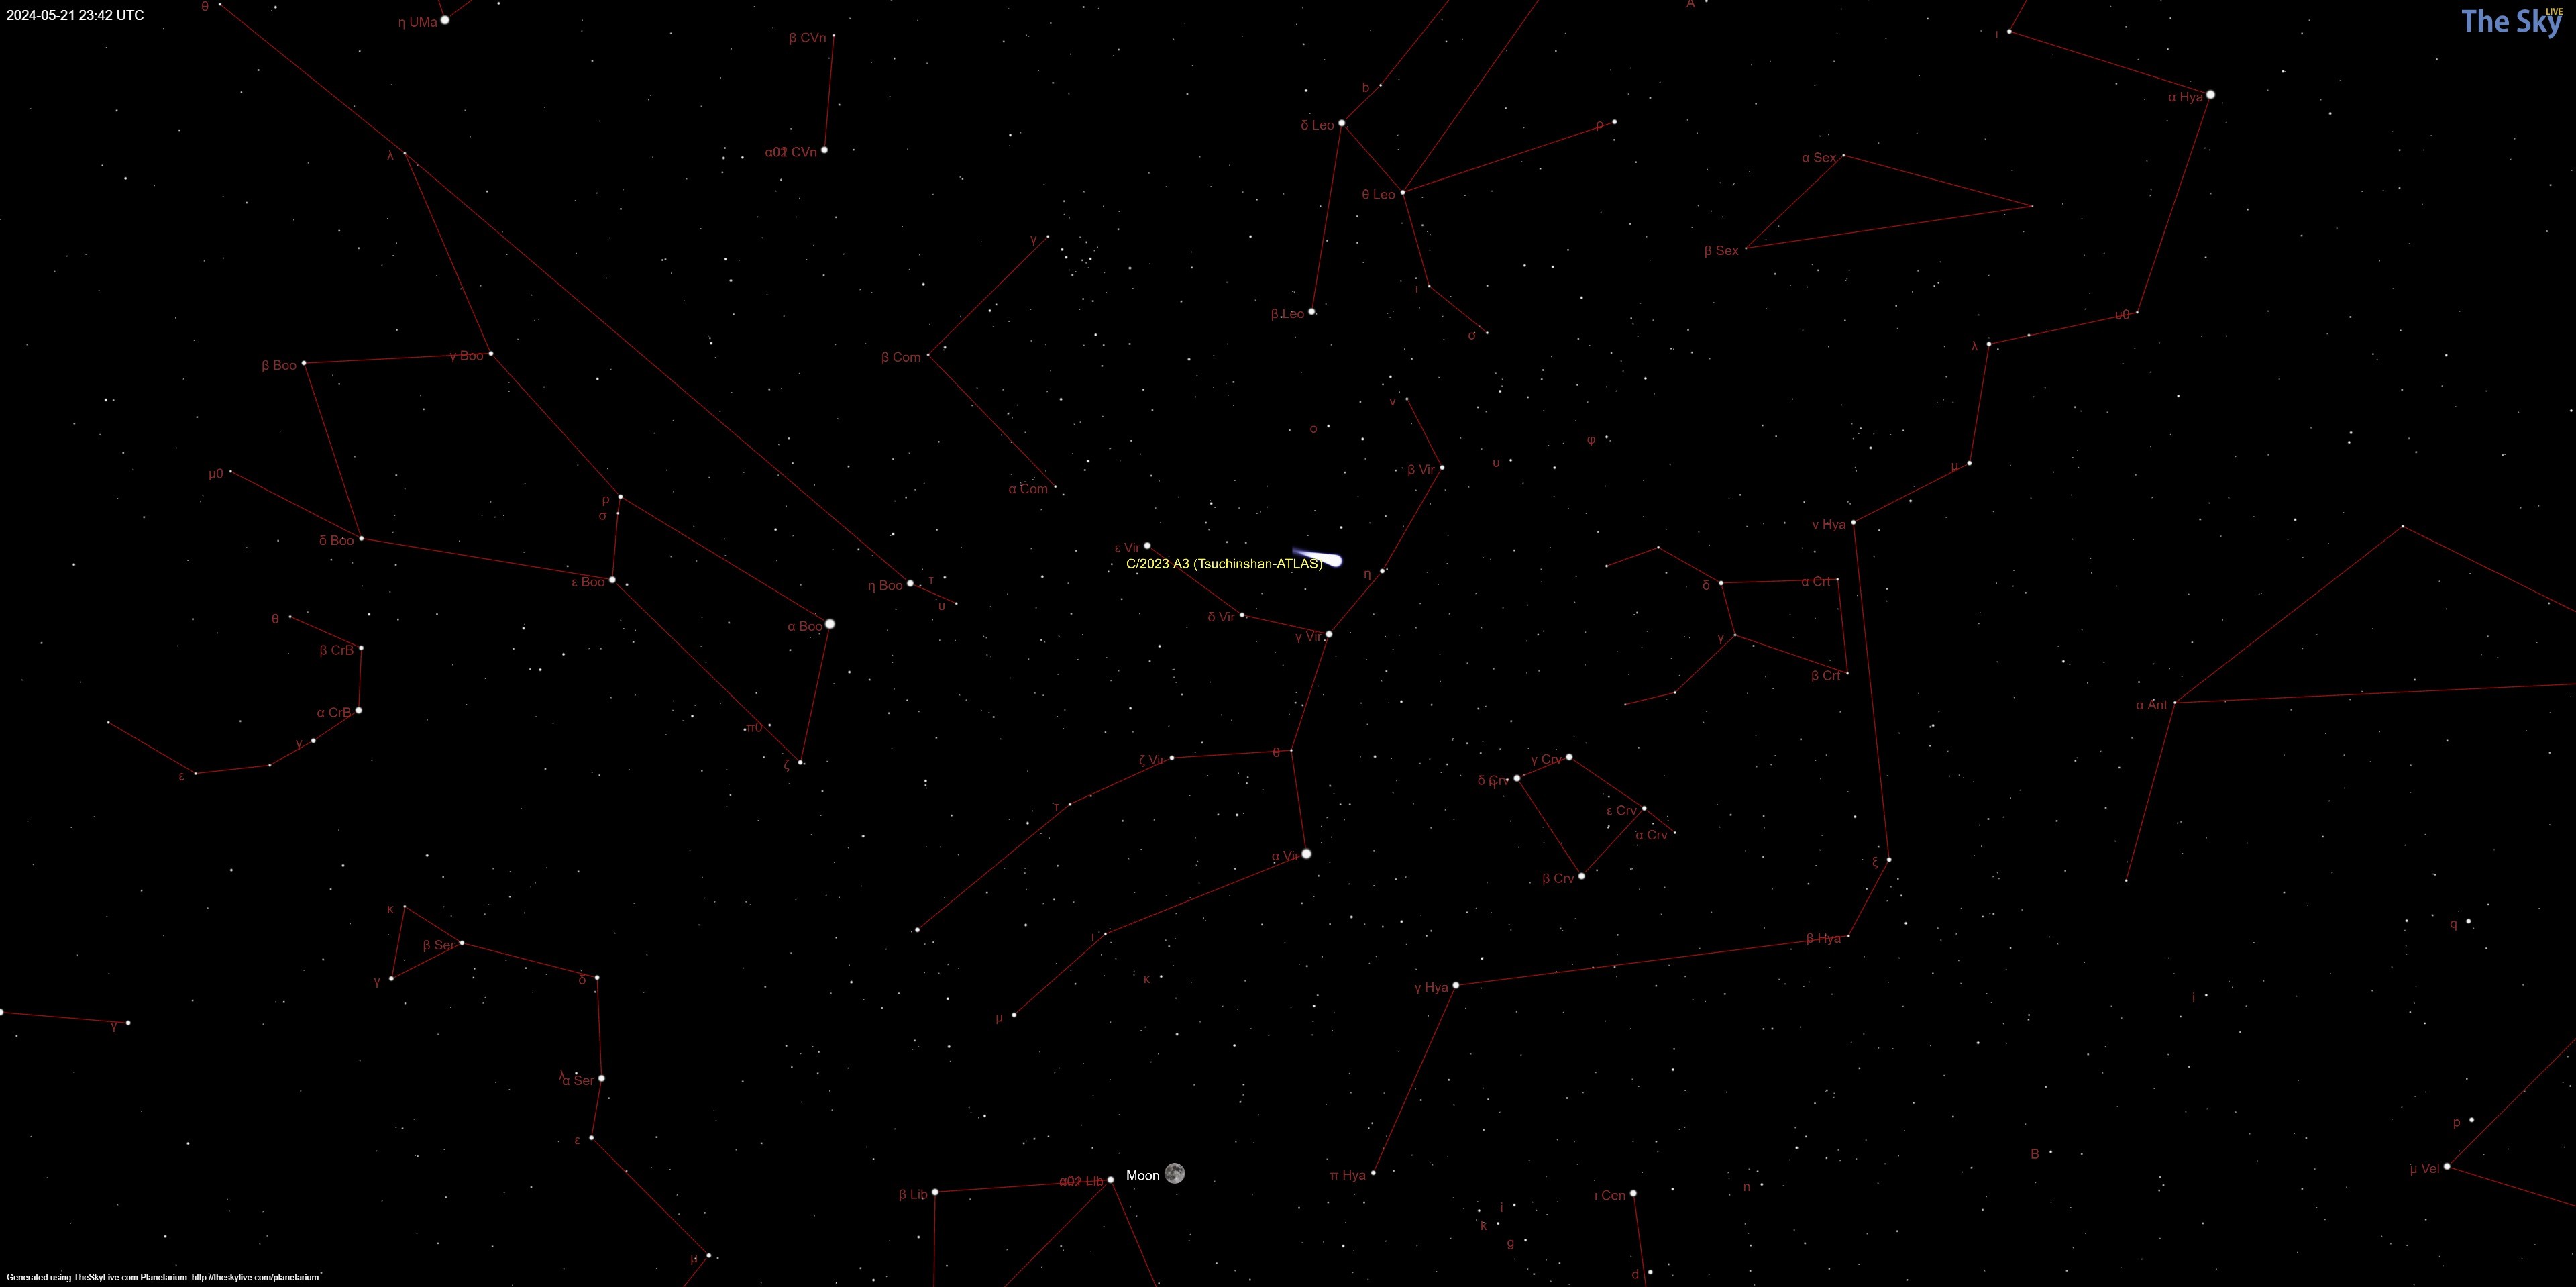 An illustration of the night sky on May 21, 2024 showing the position of comet C/2023 A3 (Tsunchinshan-ATLAS) in the Virgo constellation.